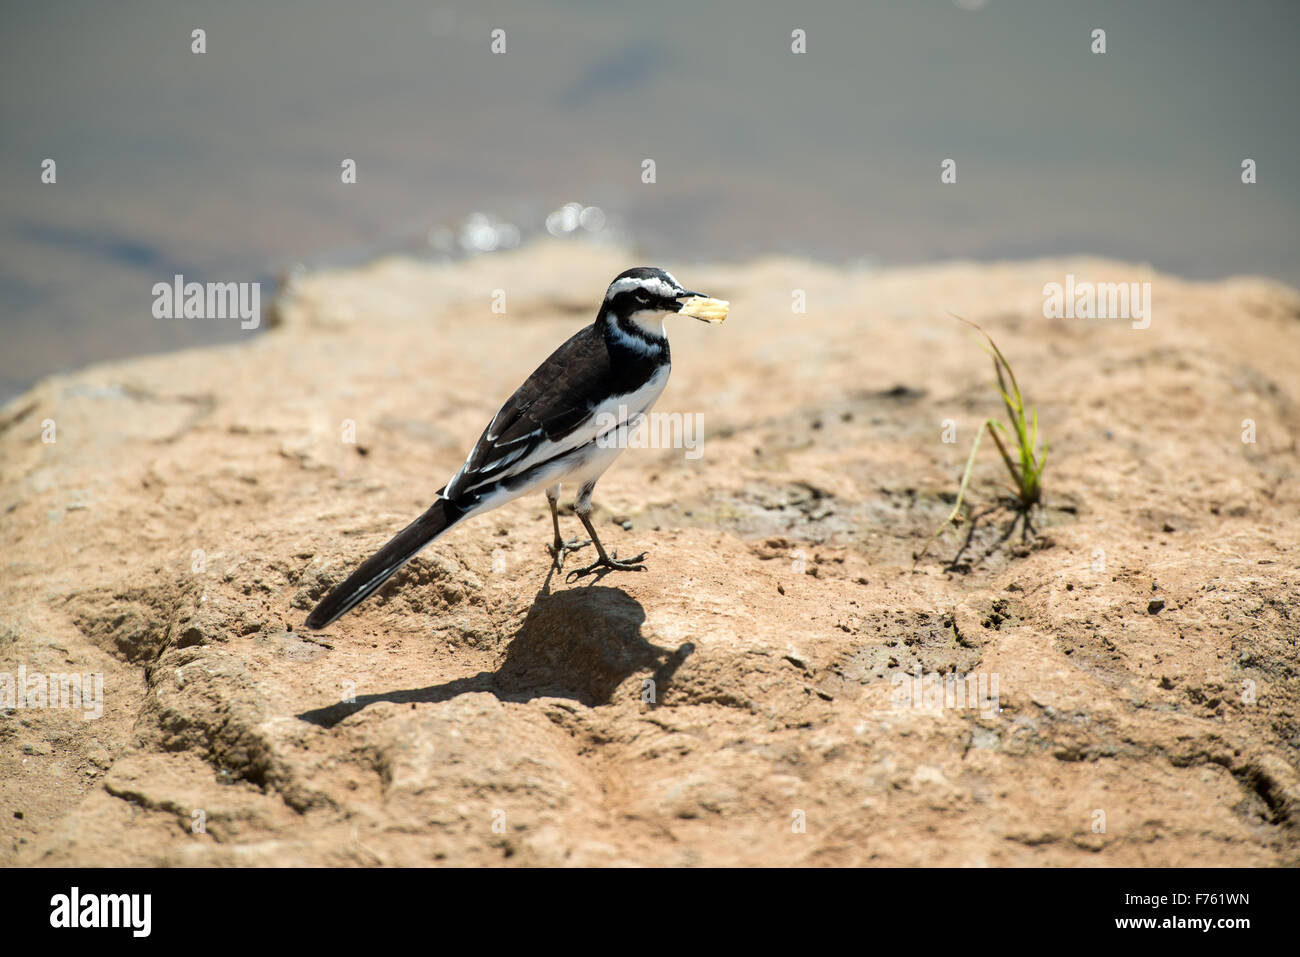 Sud Africa - Parco Nazionale Kruger Pied Wagtail (Motacilla alba) Foto Stock